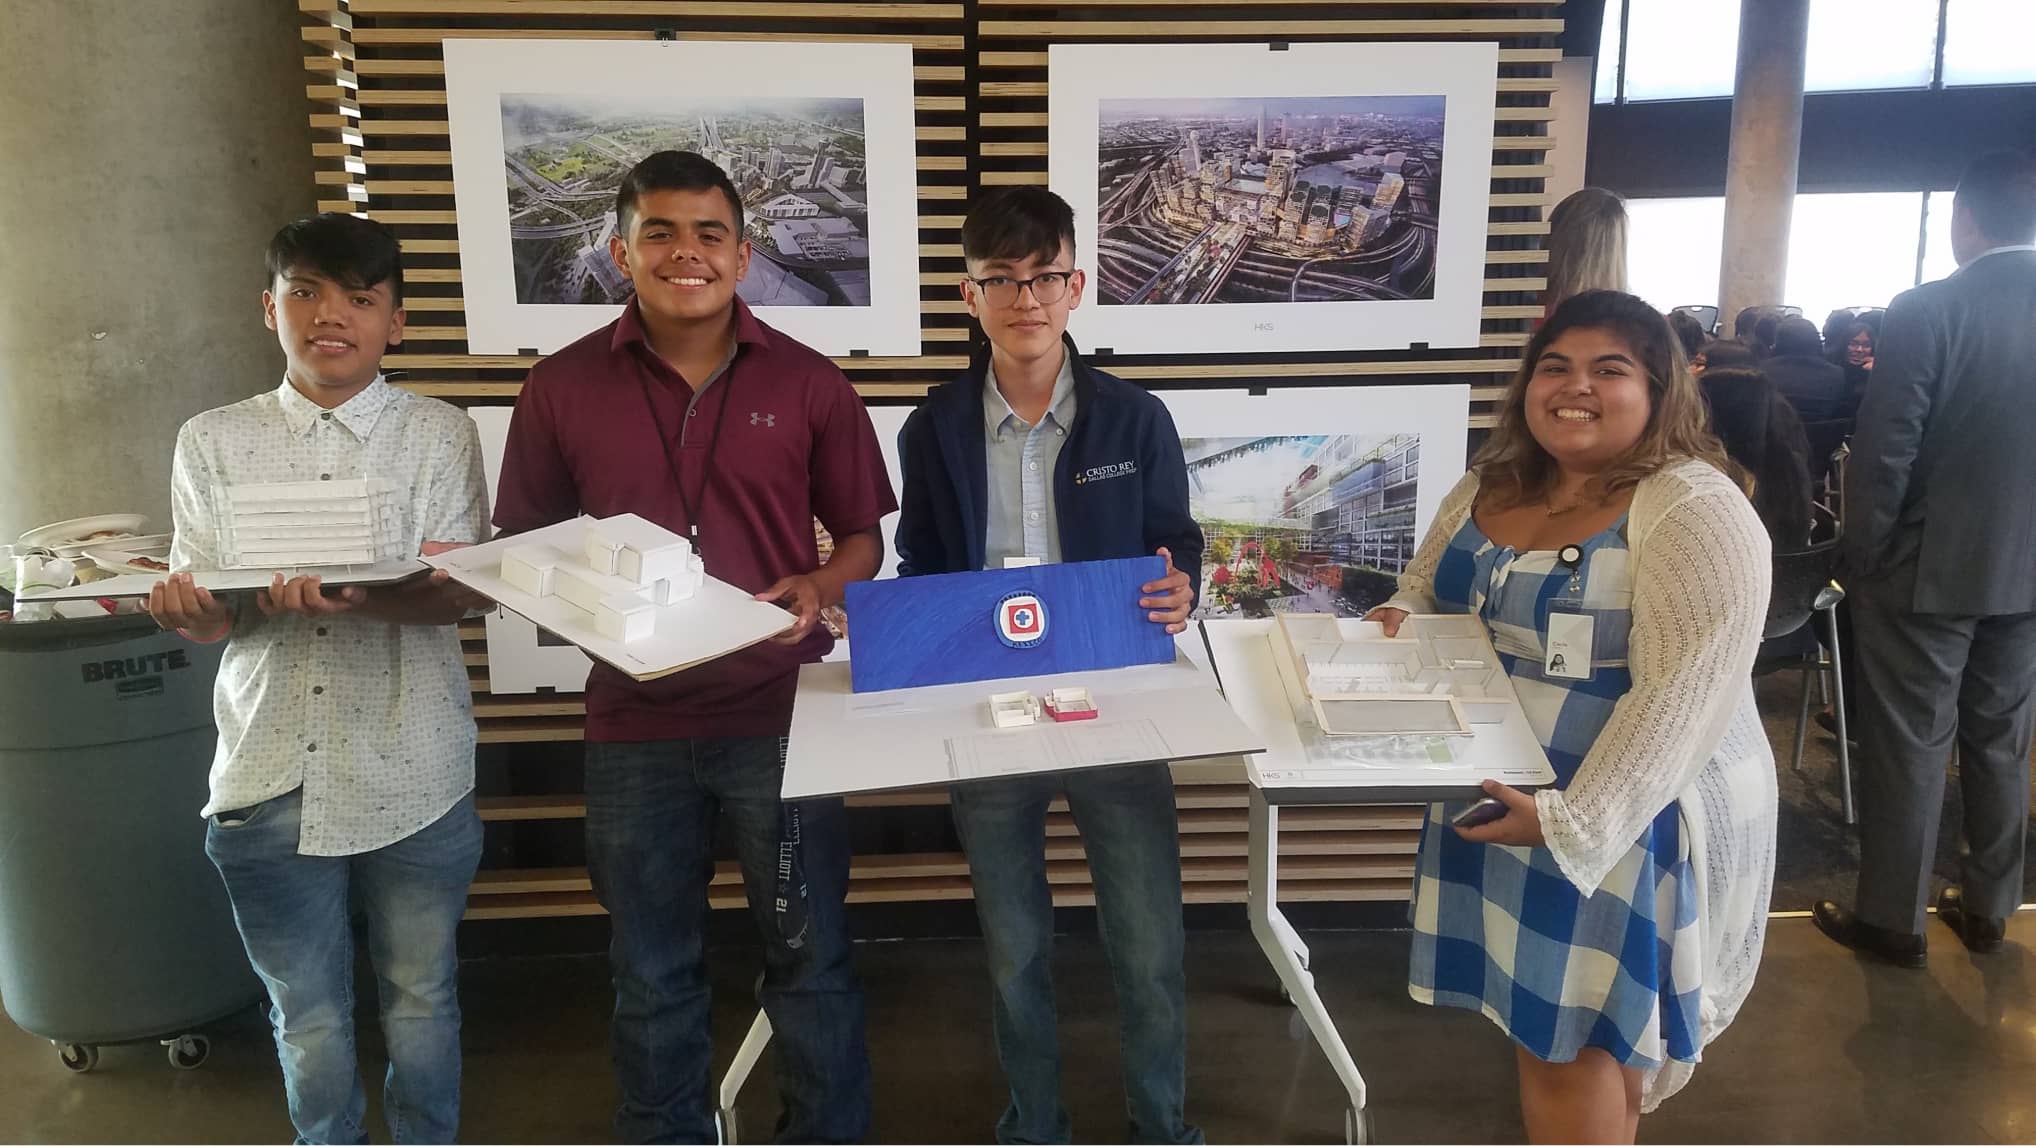 Cristo Rey students show off models they made based on Revit projects at the VIVA Cristo Rey Corporate Work-Study Program freshman tour at HKS headquarters in 2019.